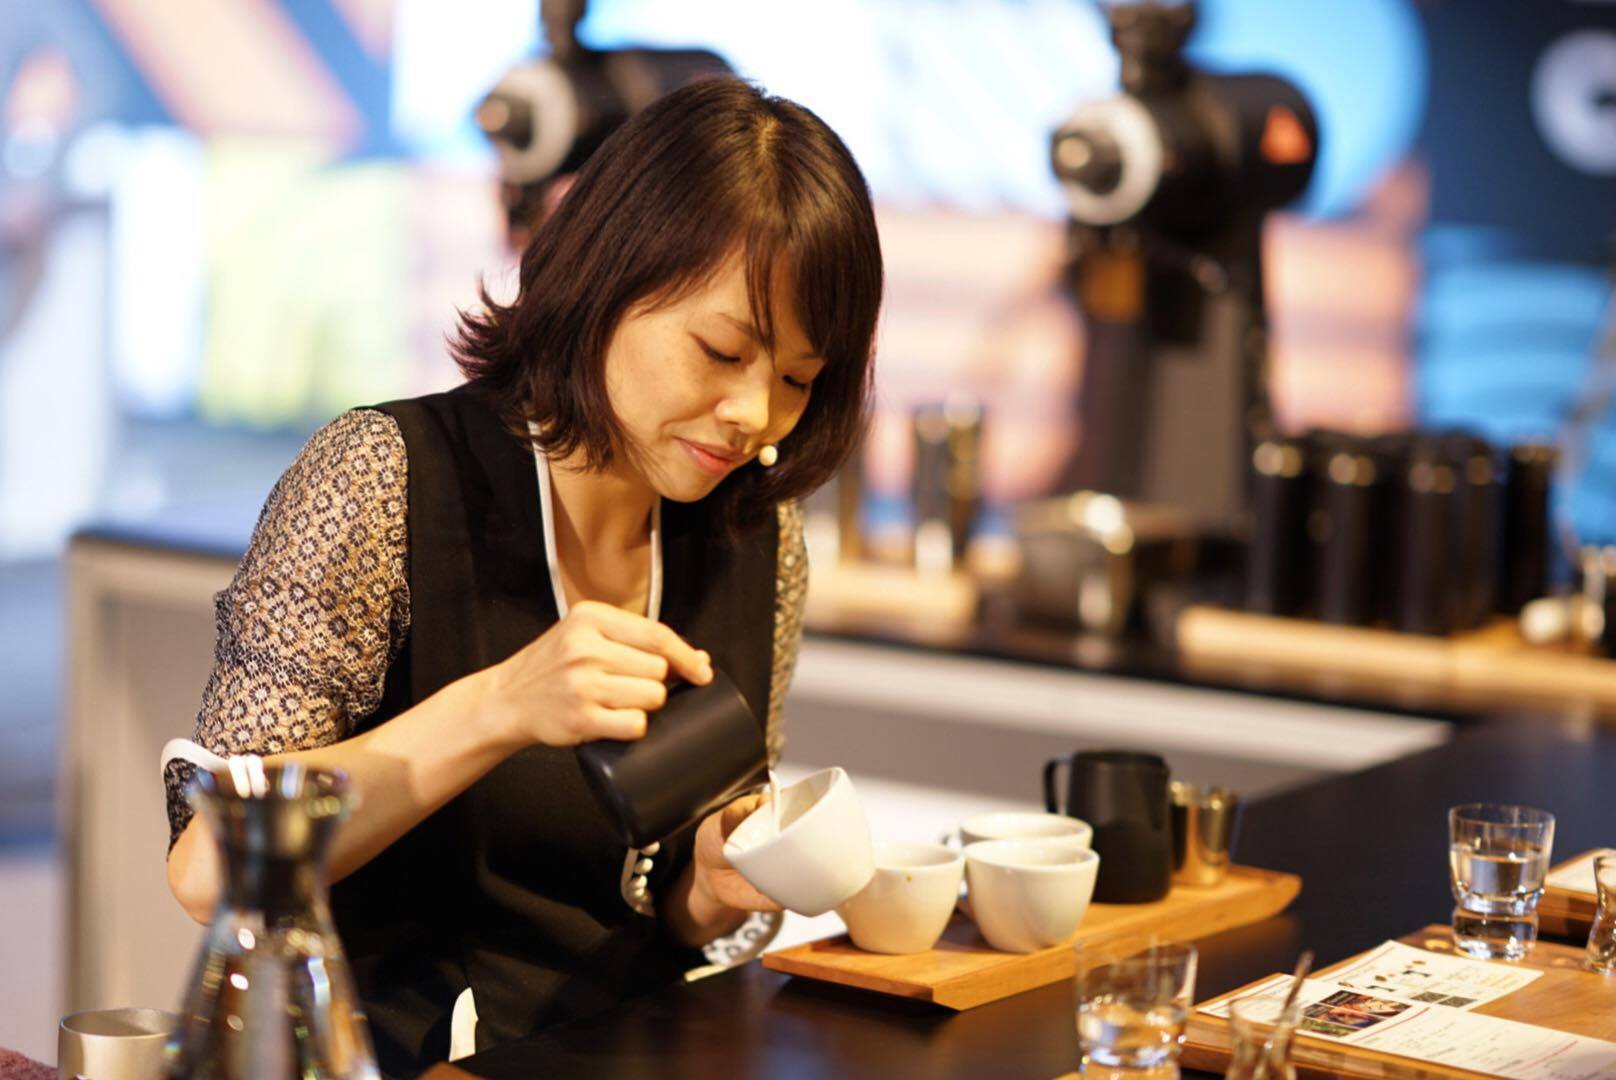 Interview with Ms. Miki Suzuki, 2nd place at the World Barista Championship 2017 Seoul : by Vaughan